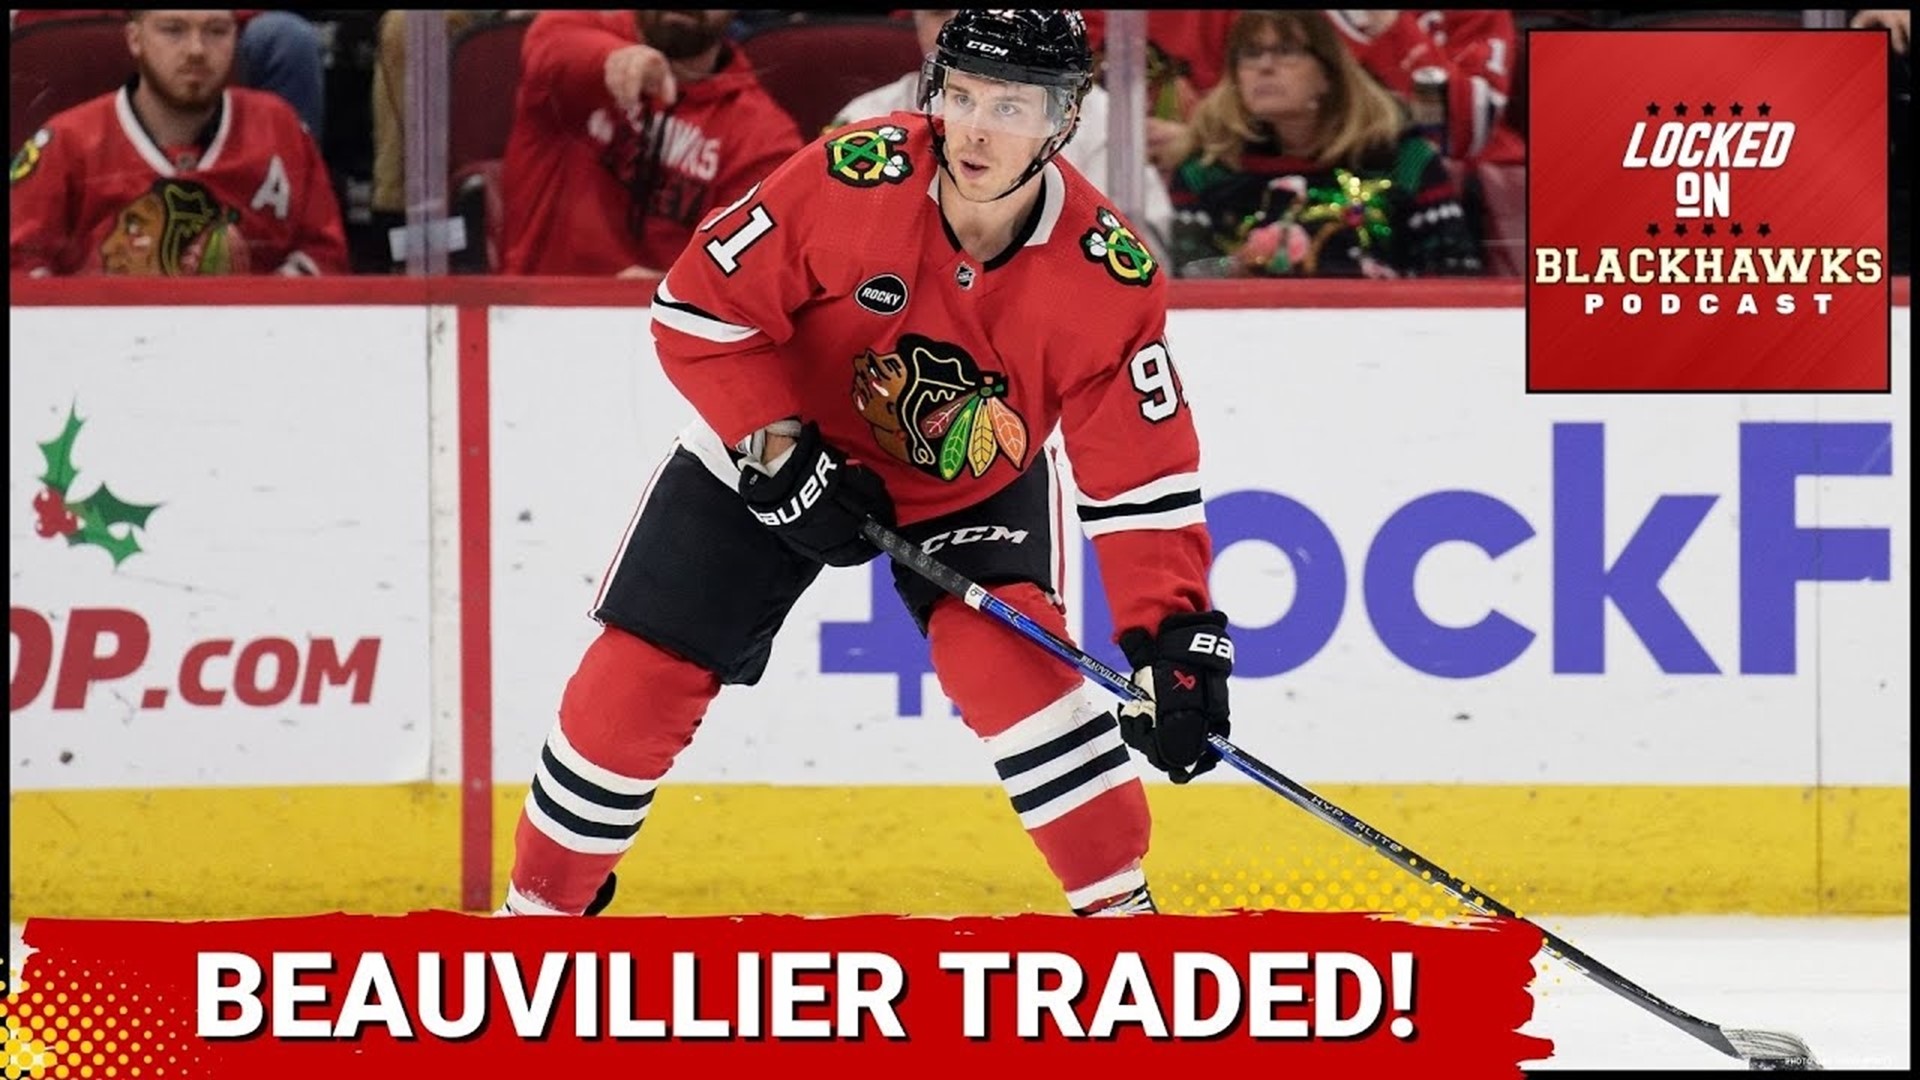 Thursday's episode begins with a discussion on the Chicago Blackhawks trading forward Anthony Beauvillier to the Nashville Predators.